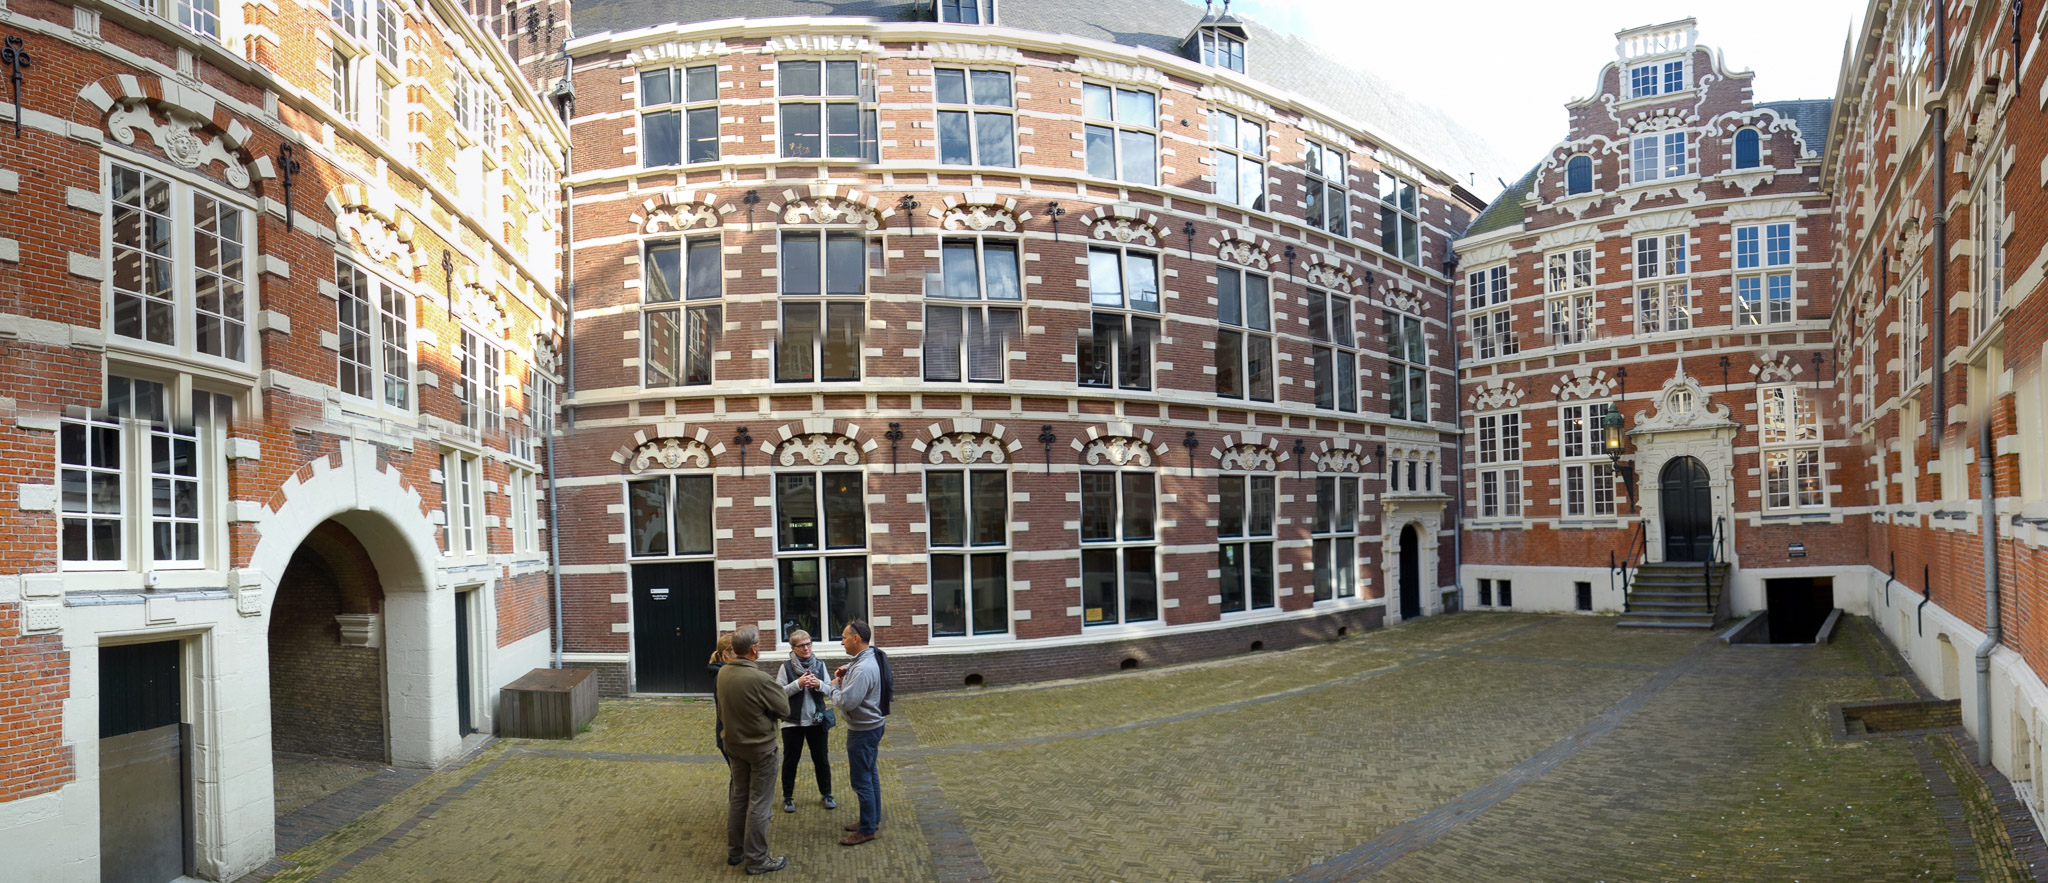 On walking tour with Synco to Oost-Indisch Huis (Dutch for "East India House")